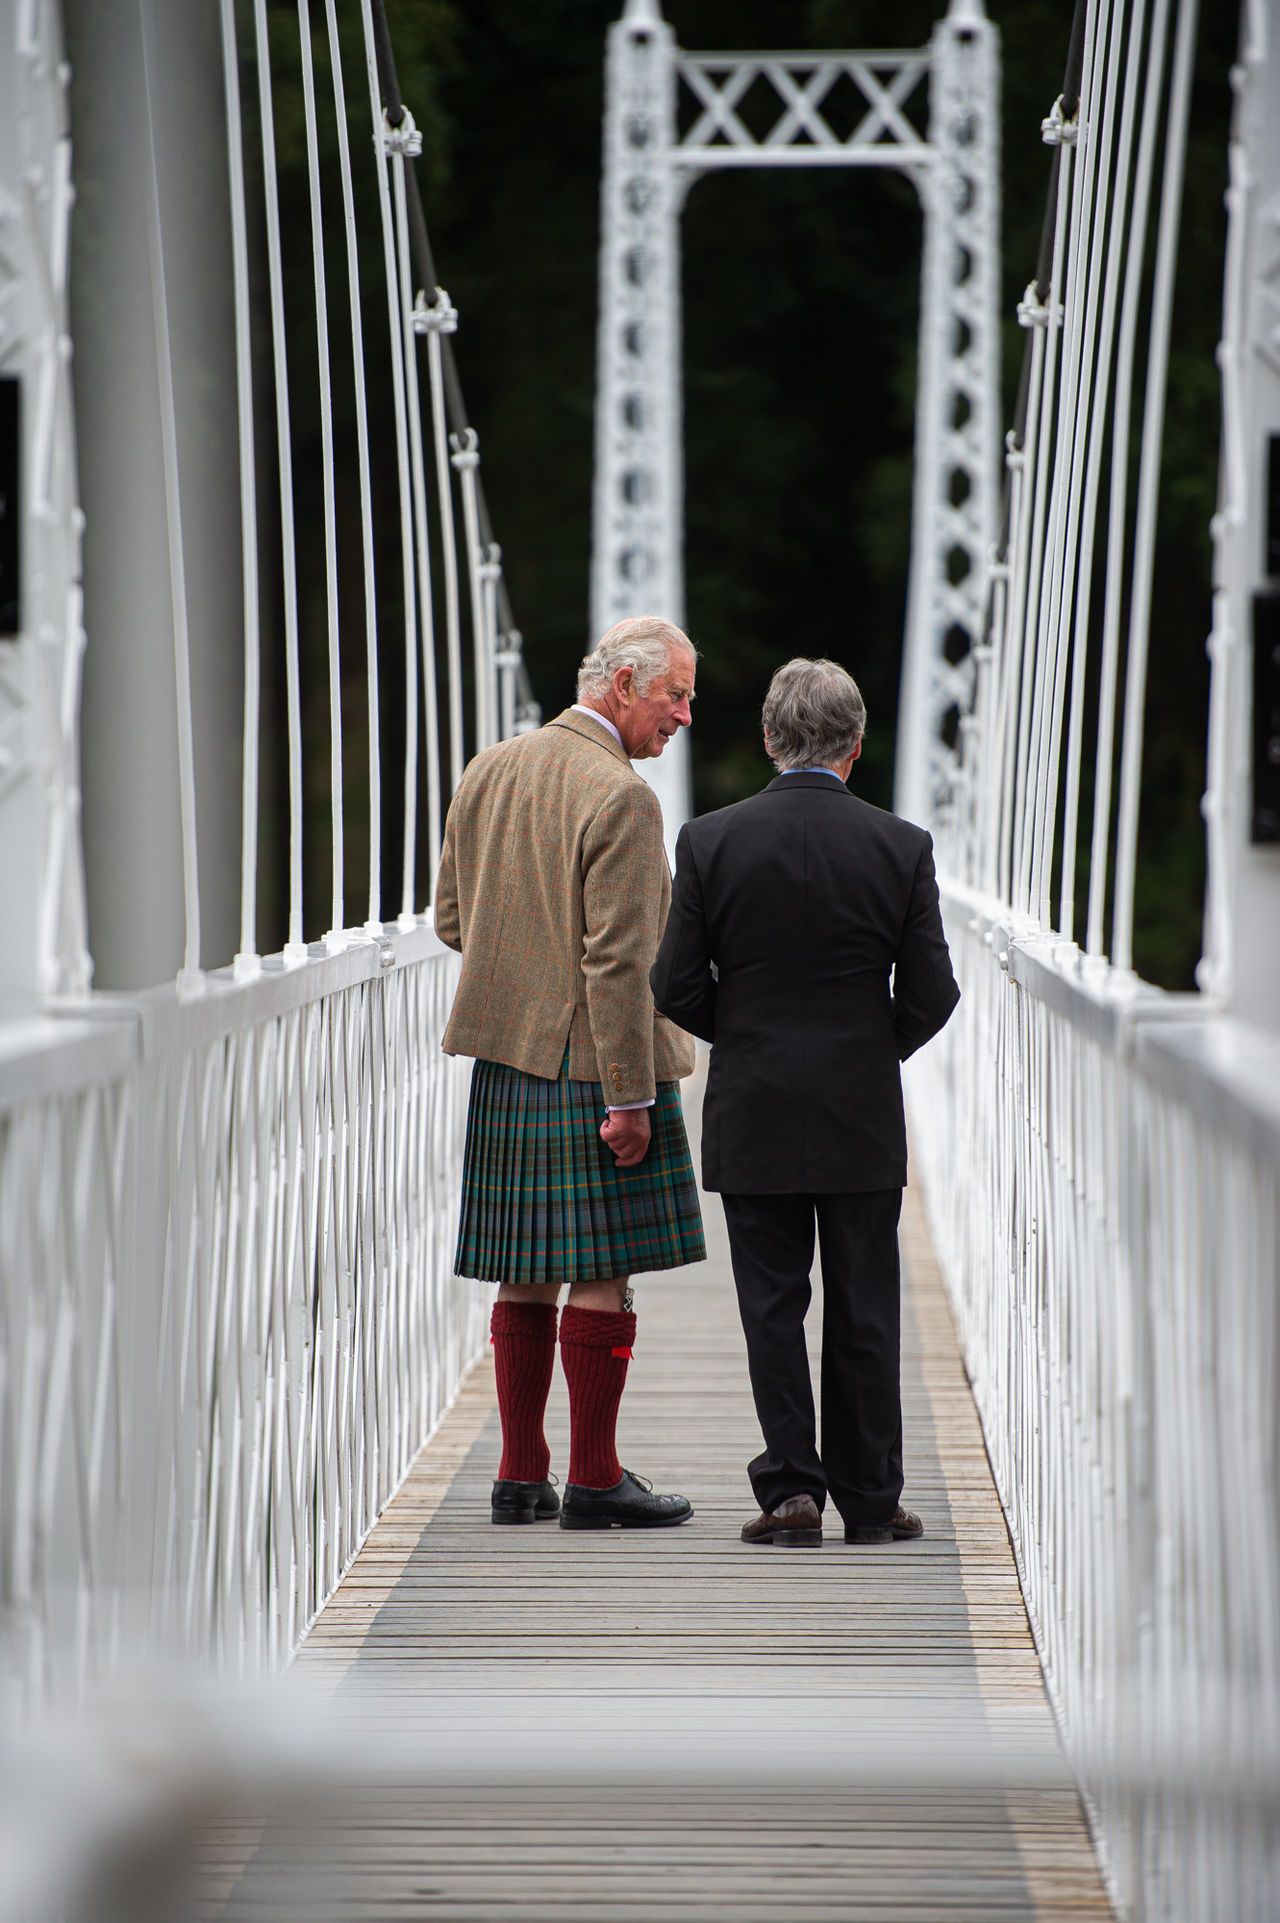 The Prince of Wales known as the Duke of Rothesay when in Scotland, with Bridges Manager, Donald Macpherson during a visit to Cambus O'May suspension bridge in Aberdeenshire following its repair.